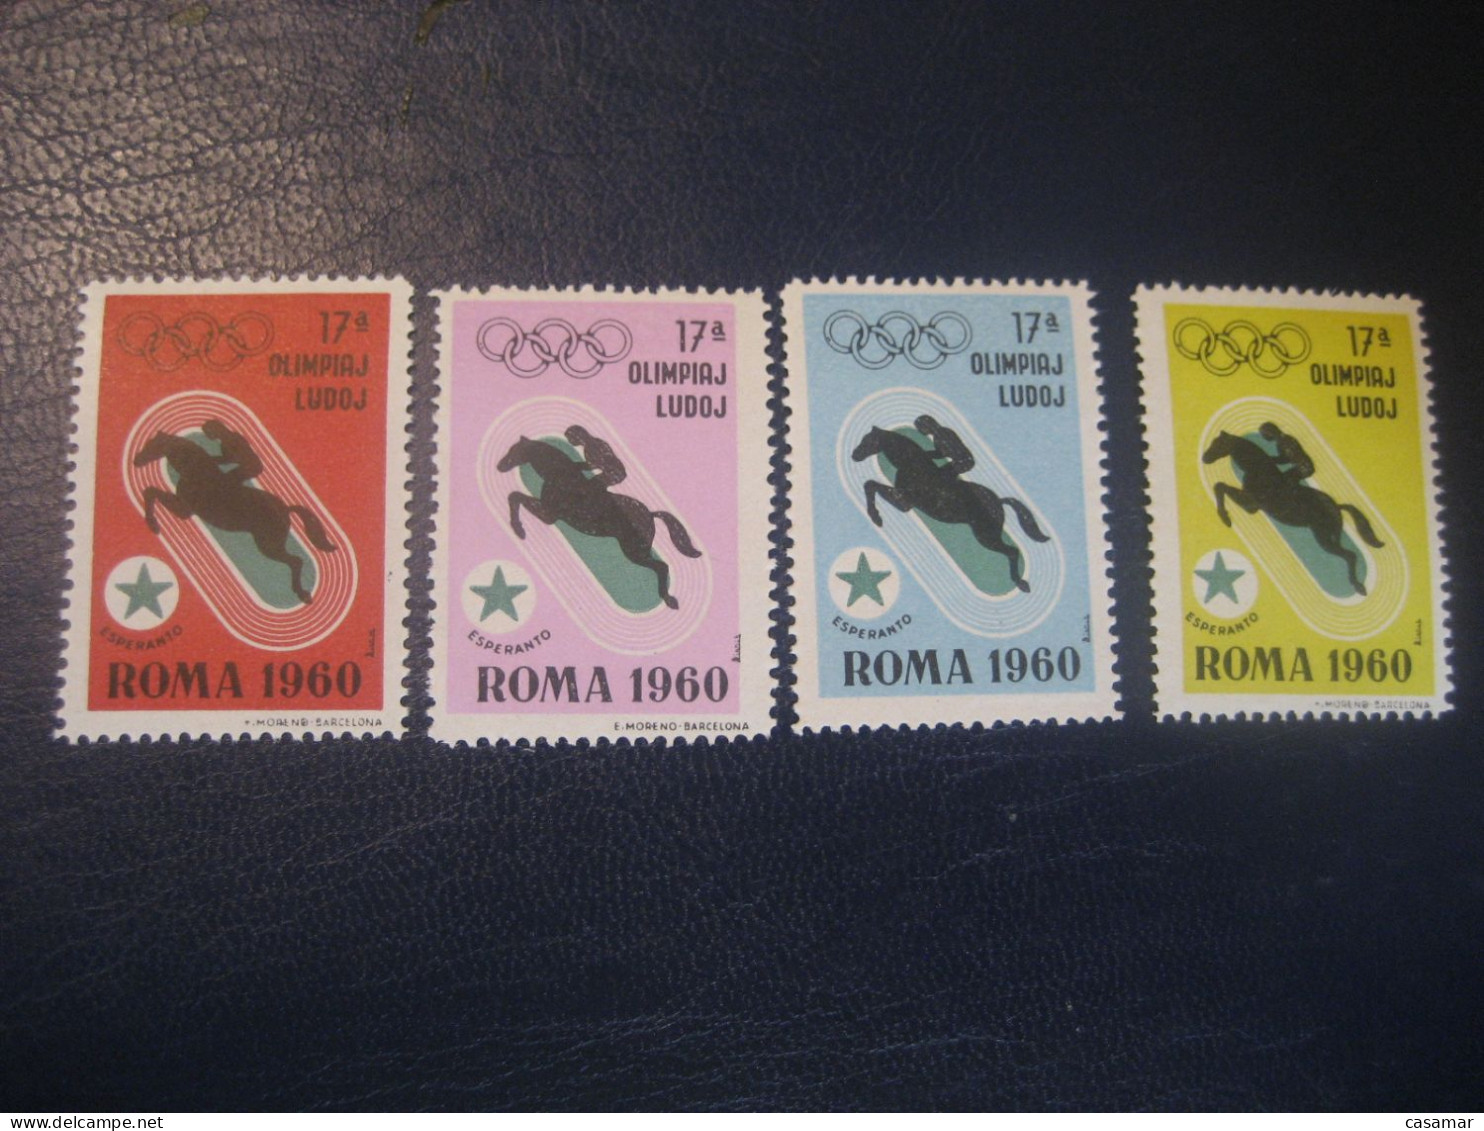 ROMA 1960 Equestrian Equitation Horse Olympic Games Olympics Esperanto 4 Poster Stamp Vignette ITALY Spain Label - Hípica